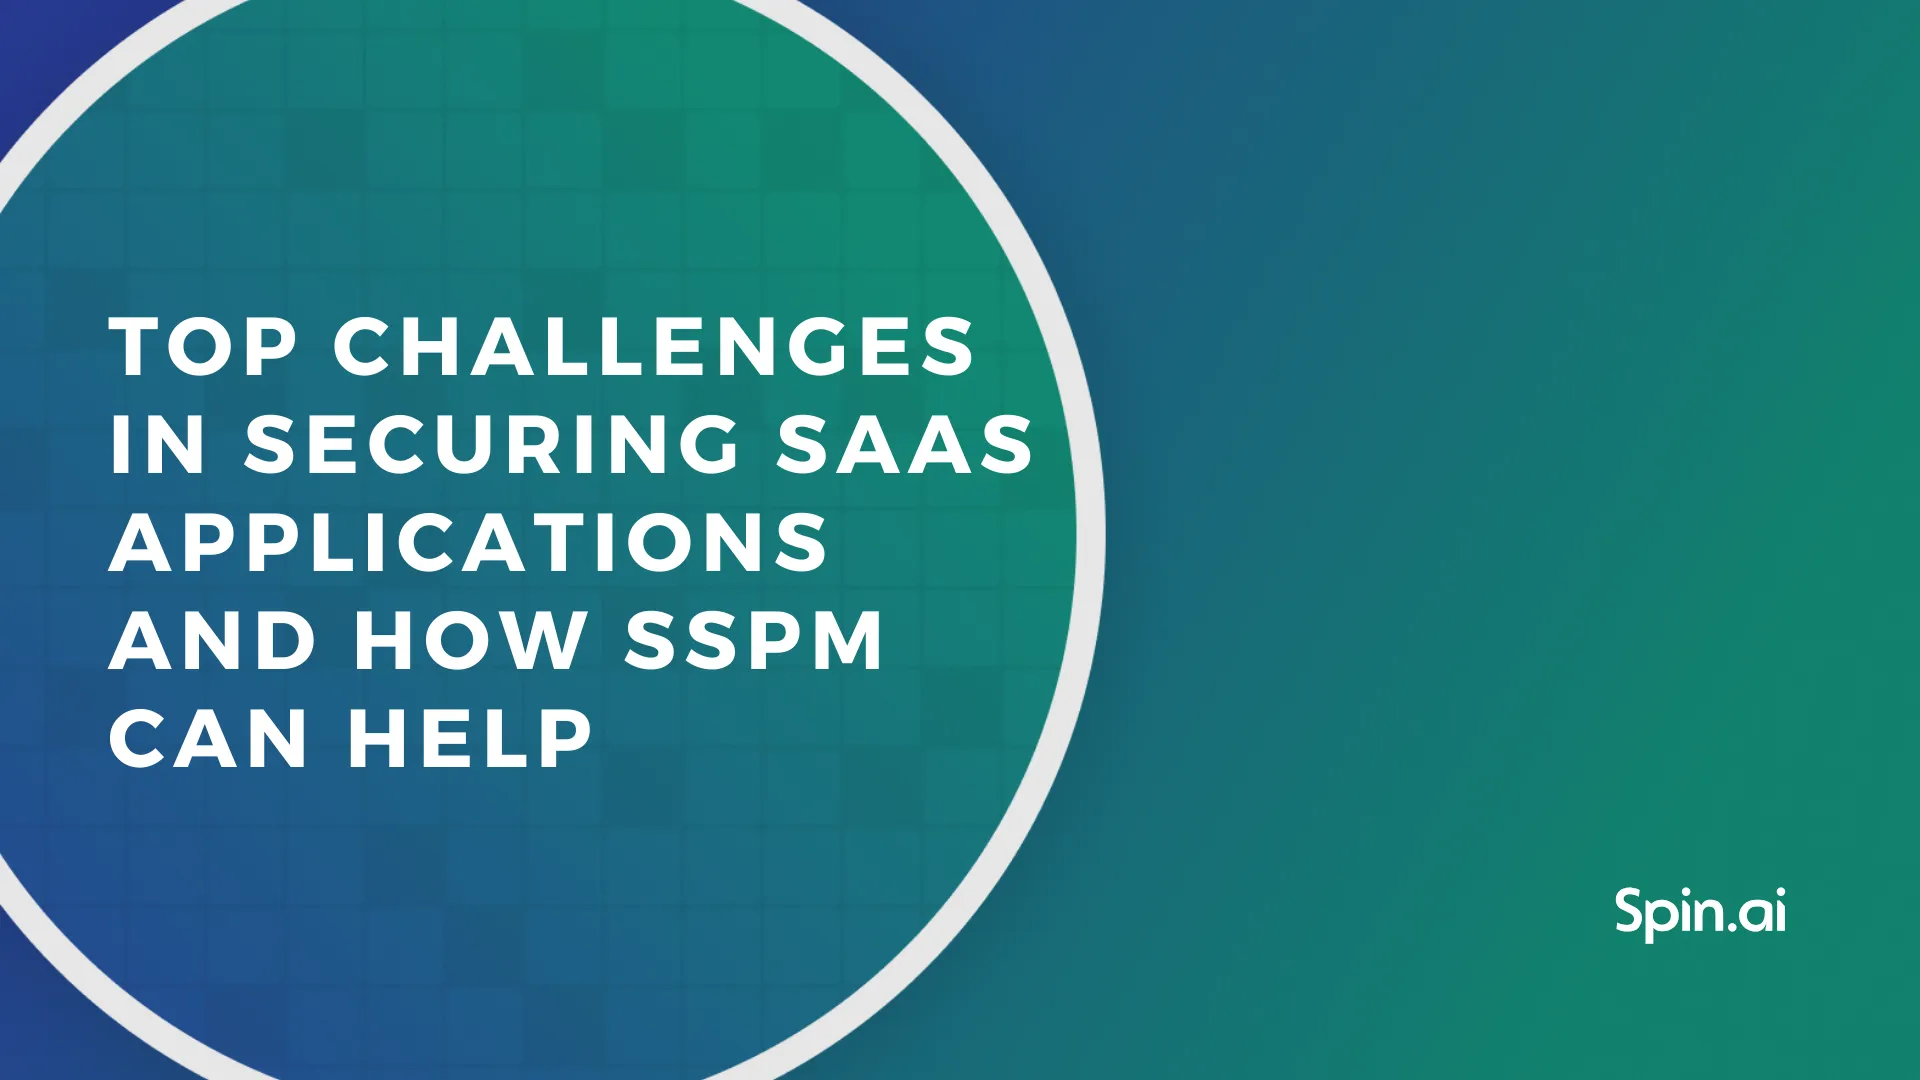 Top Challenges in Securing SaaS Applications and How SSPM Can Help